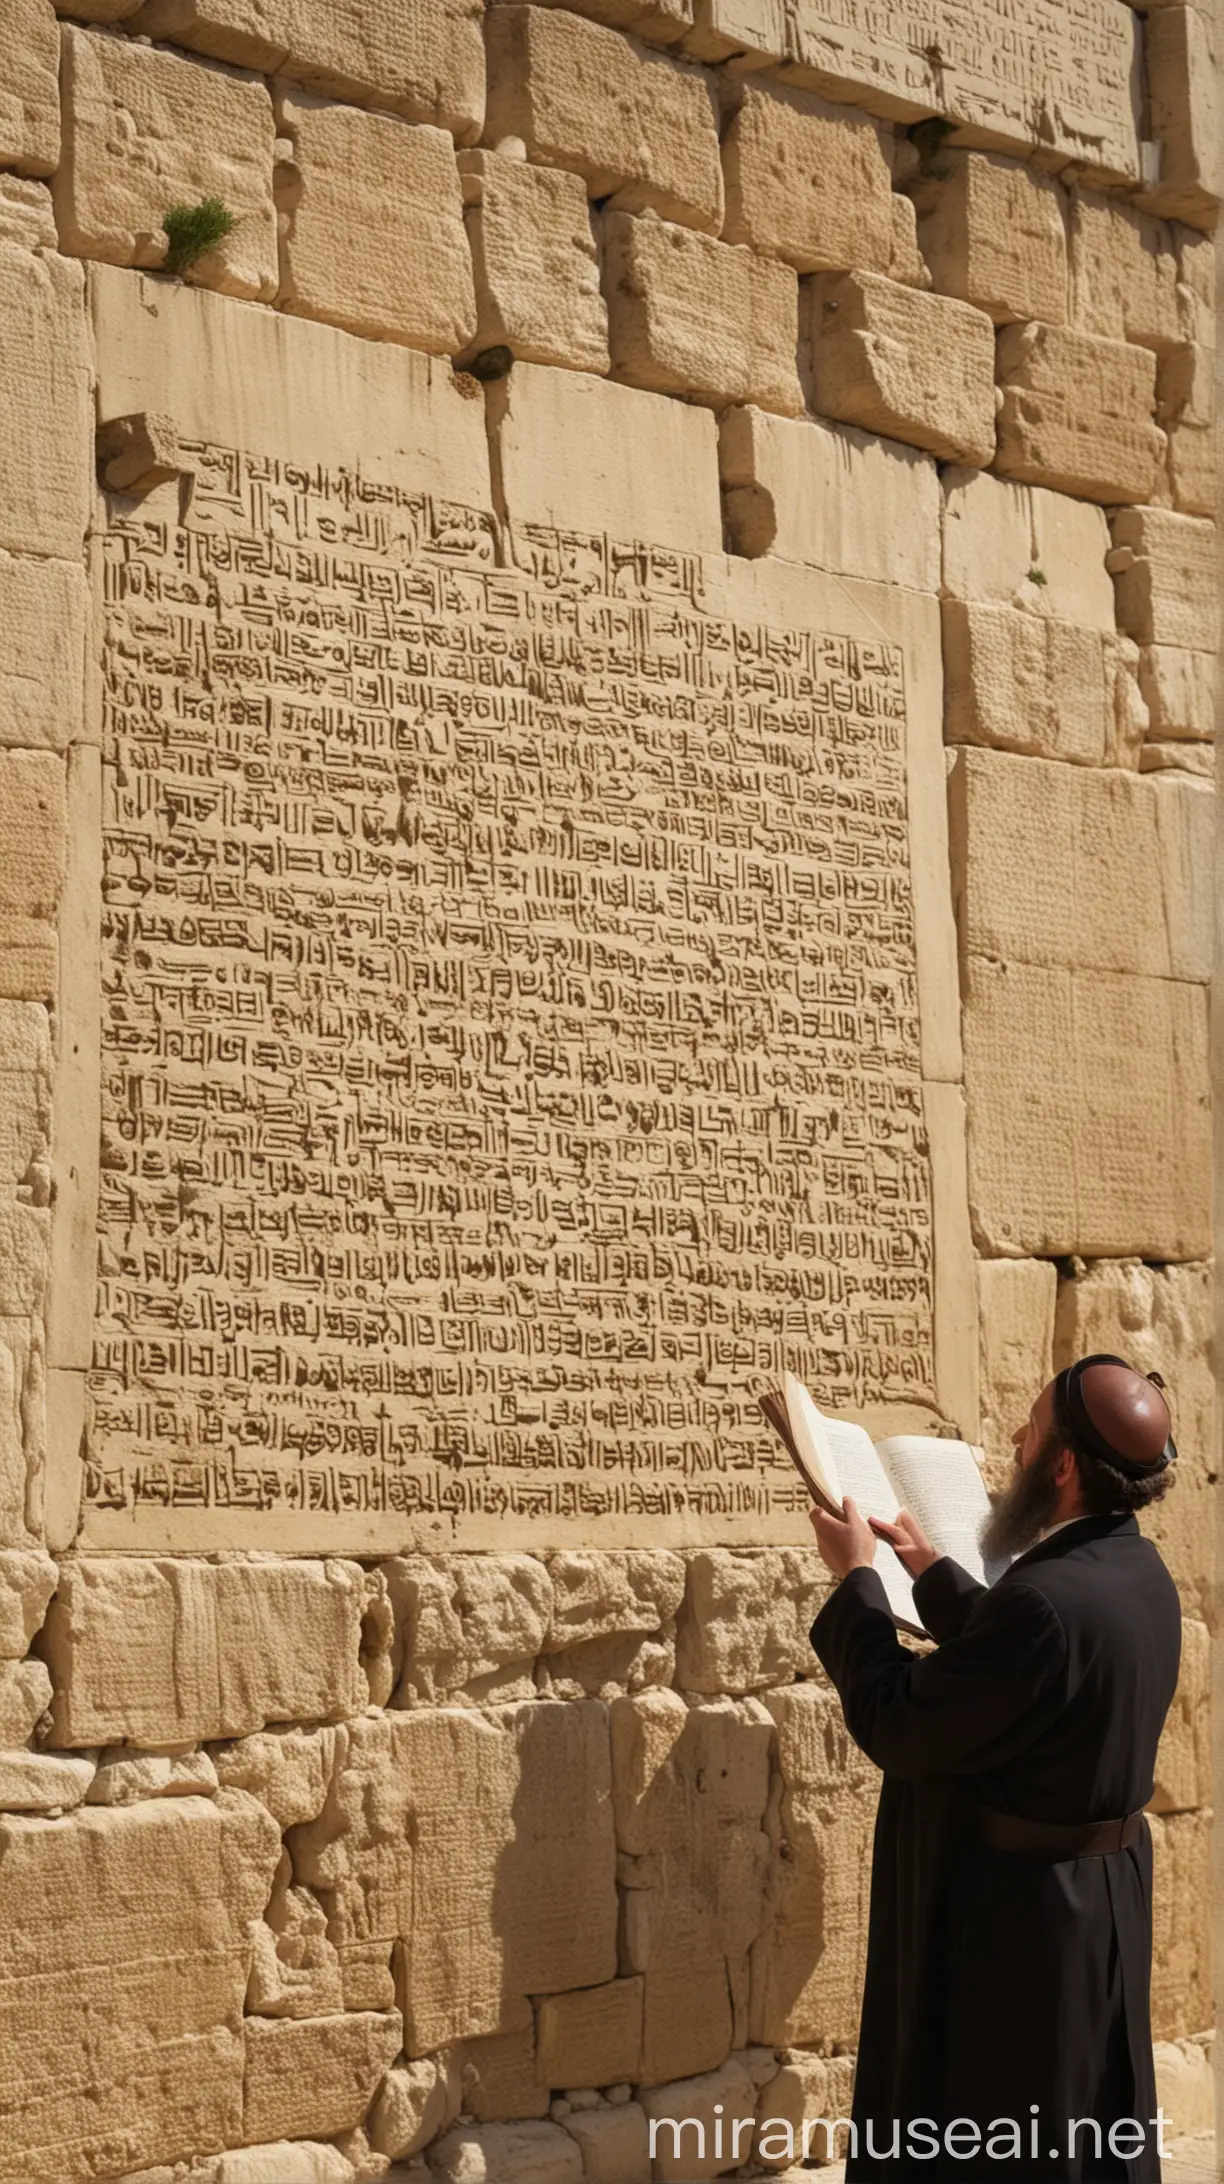 Jerusalem Walls Dedication Ceremony with Ancient Hebrew Text and Illustrations